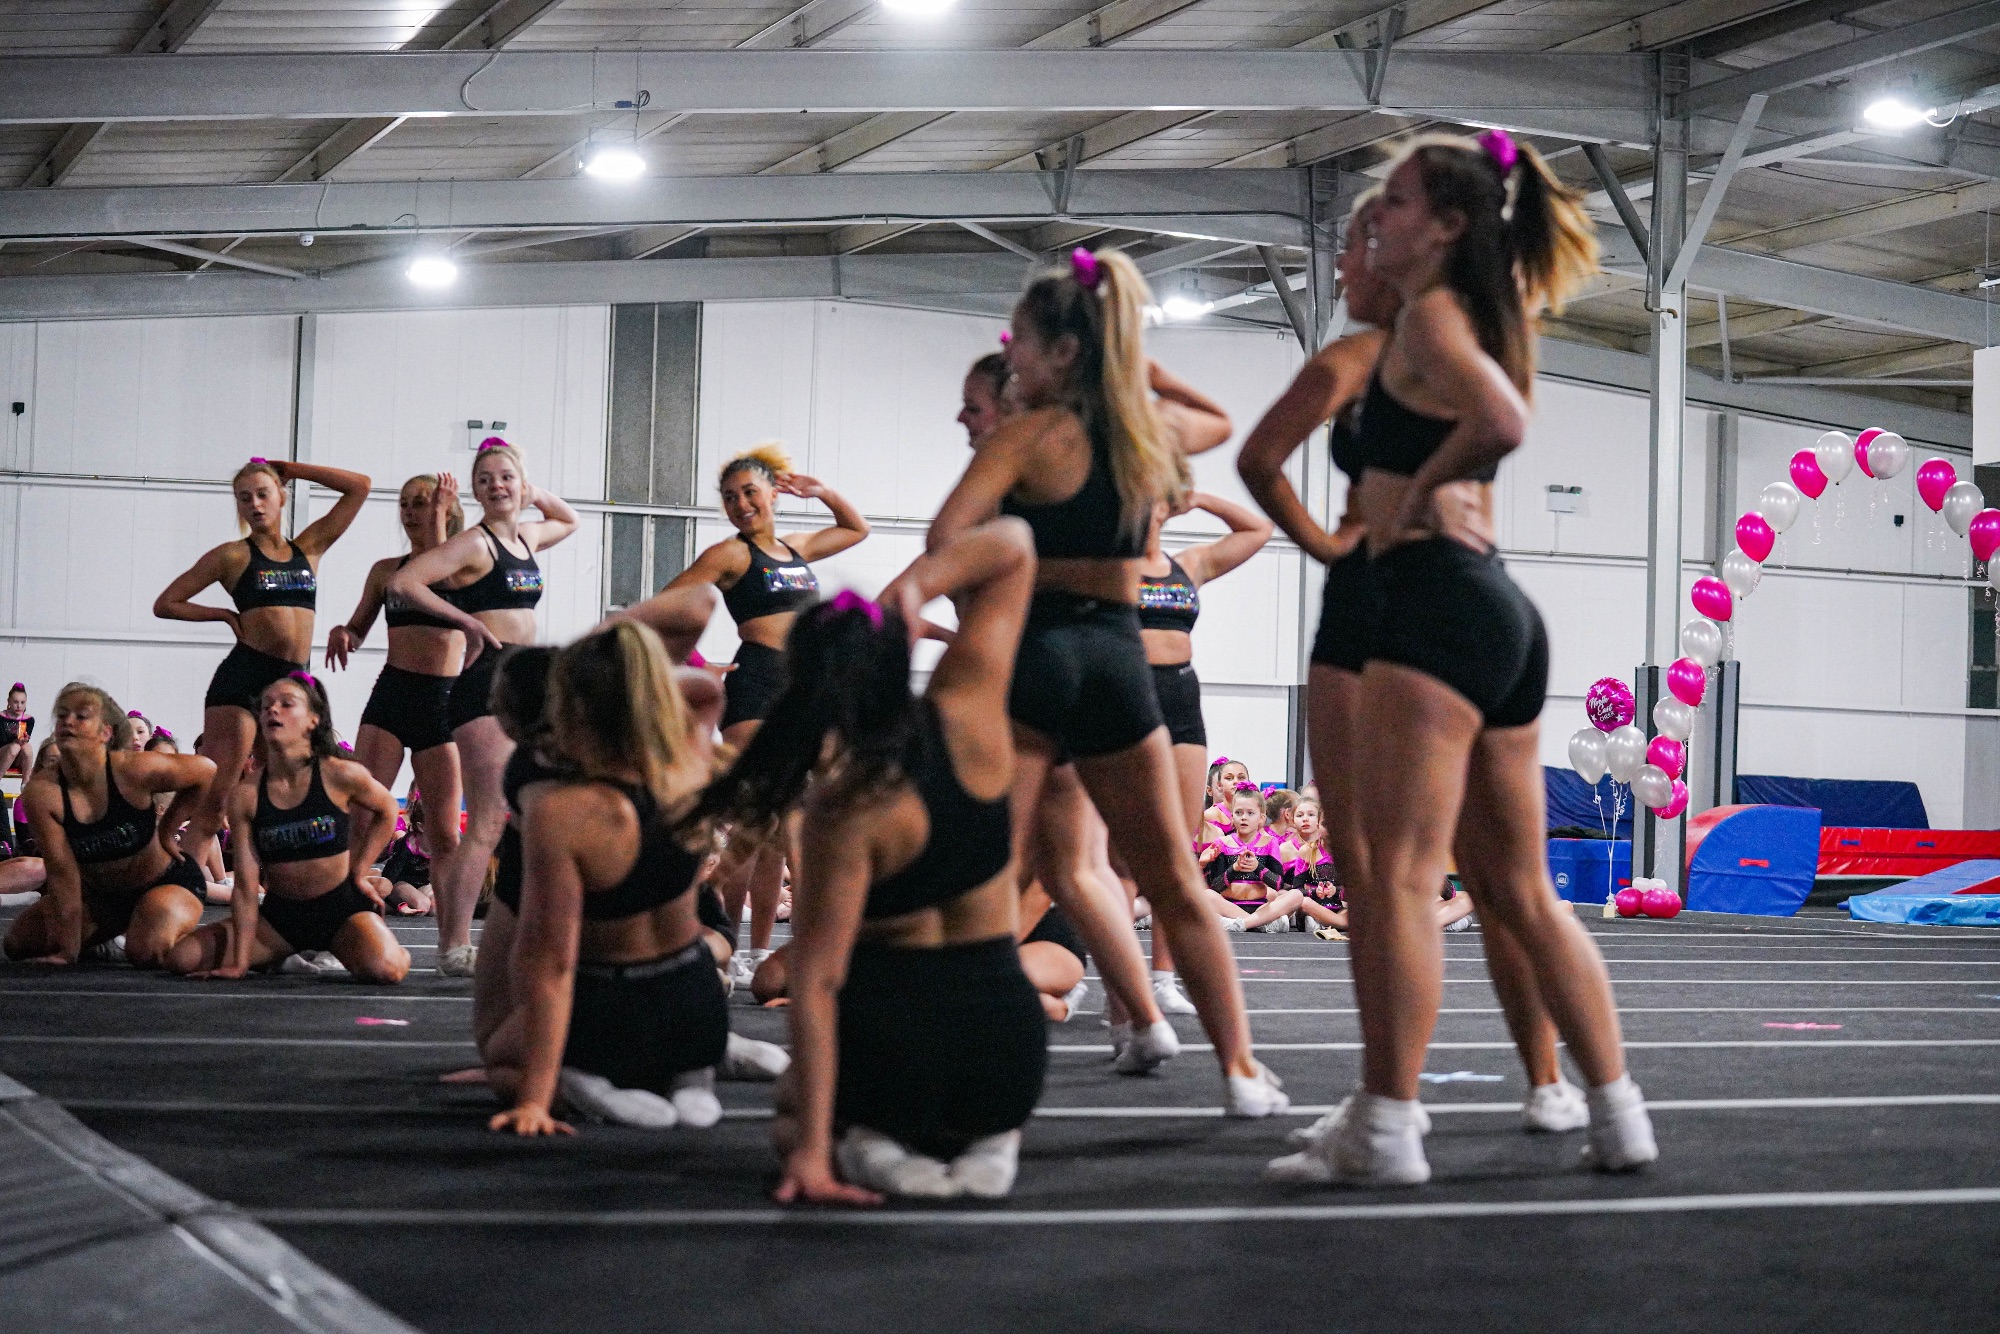 A group of girls rehearsing a cheer performance